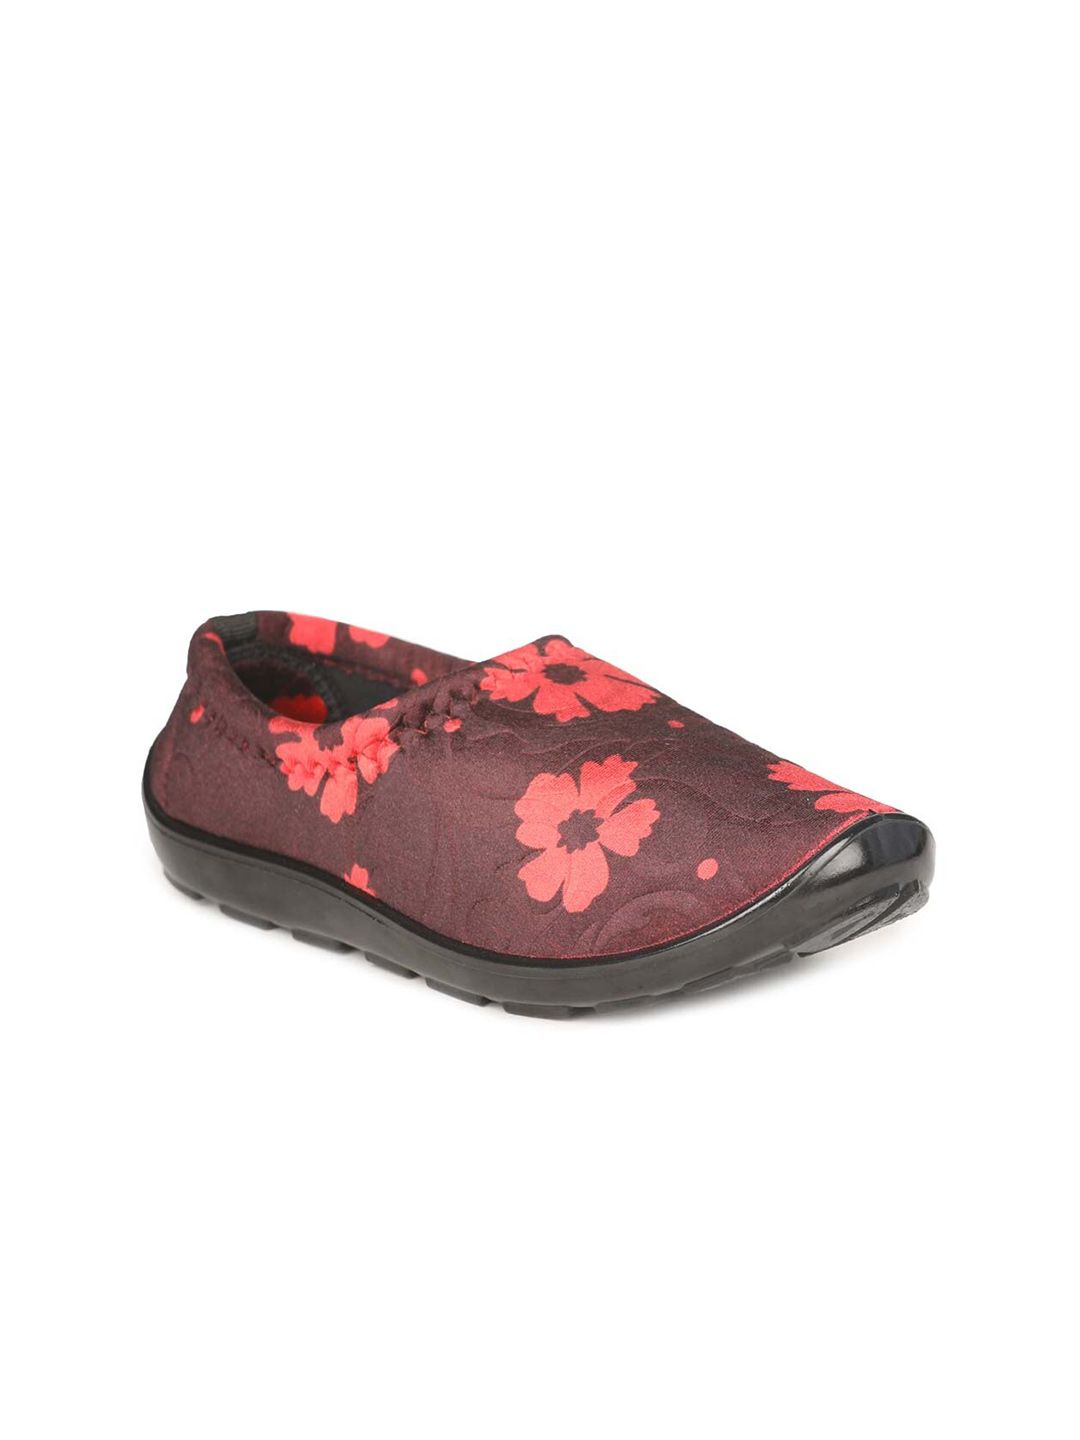 Paragon Women Floral Printed Walking Shoes Price in India